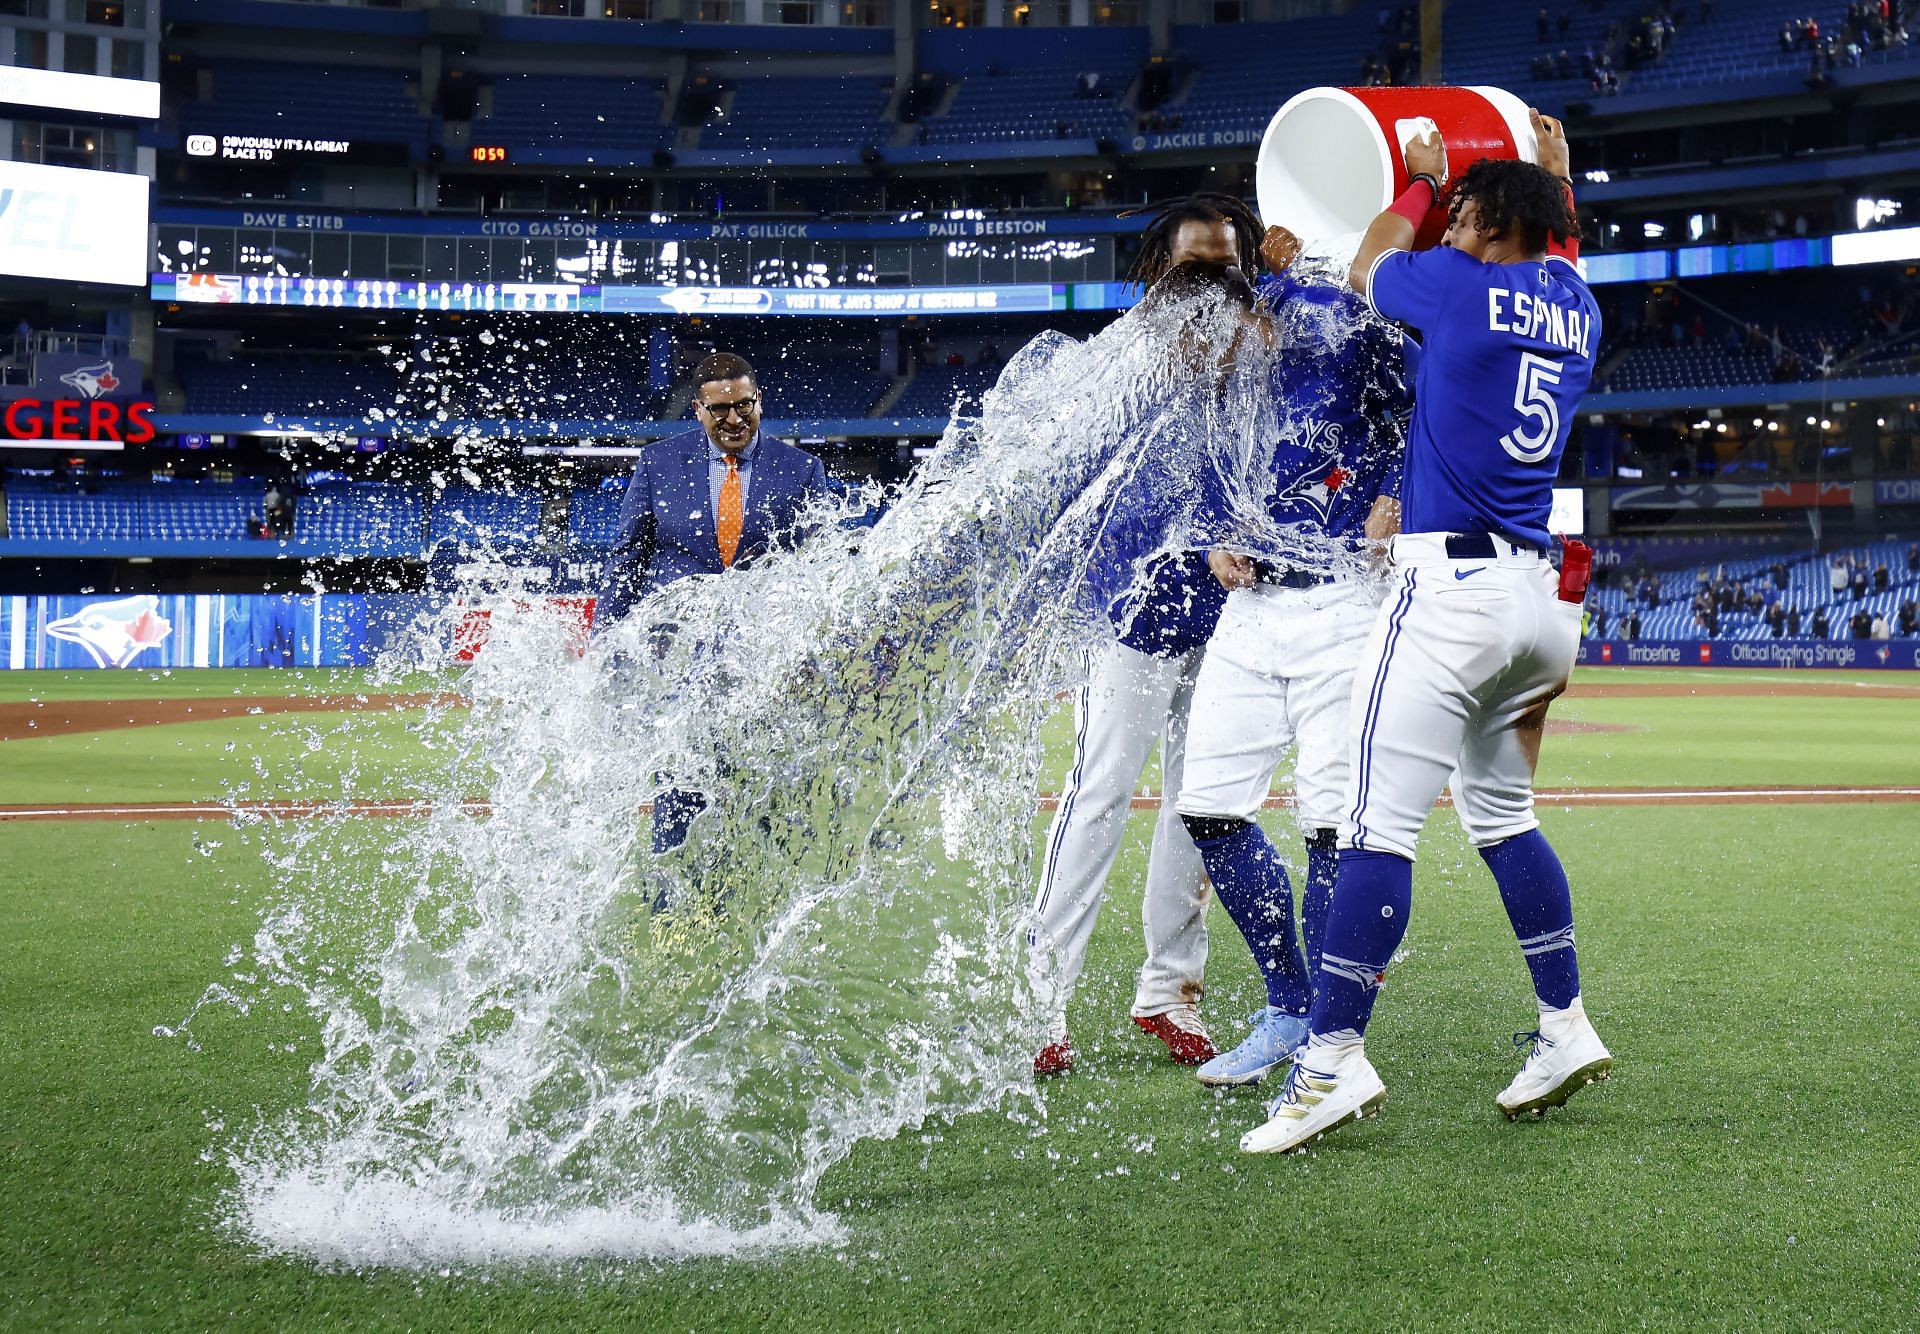 The Blue Jays celebrate a walk-off win Tuesday against the Red Sox.